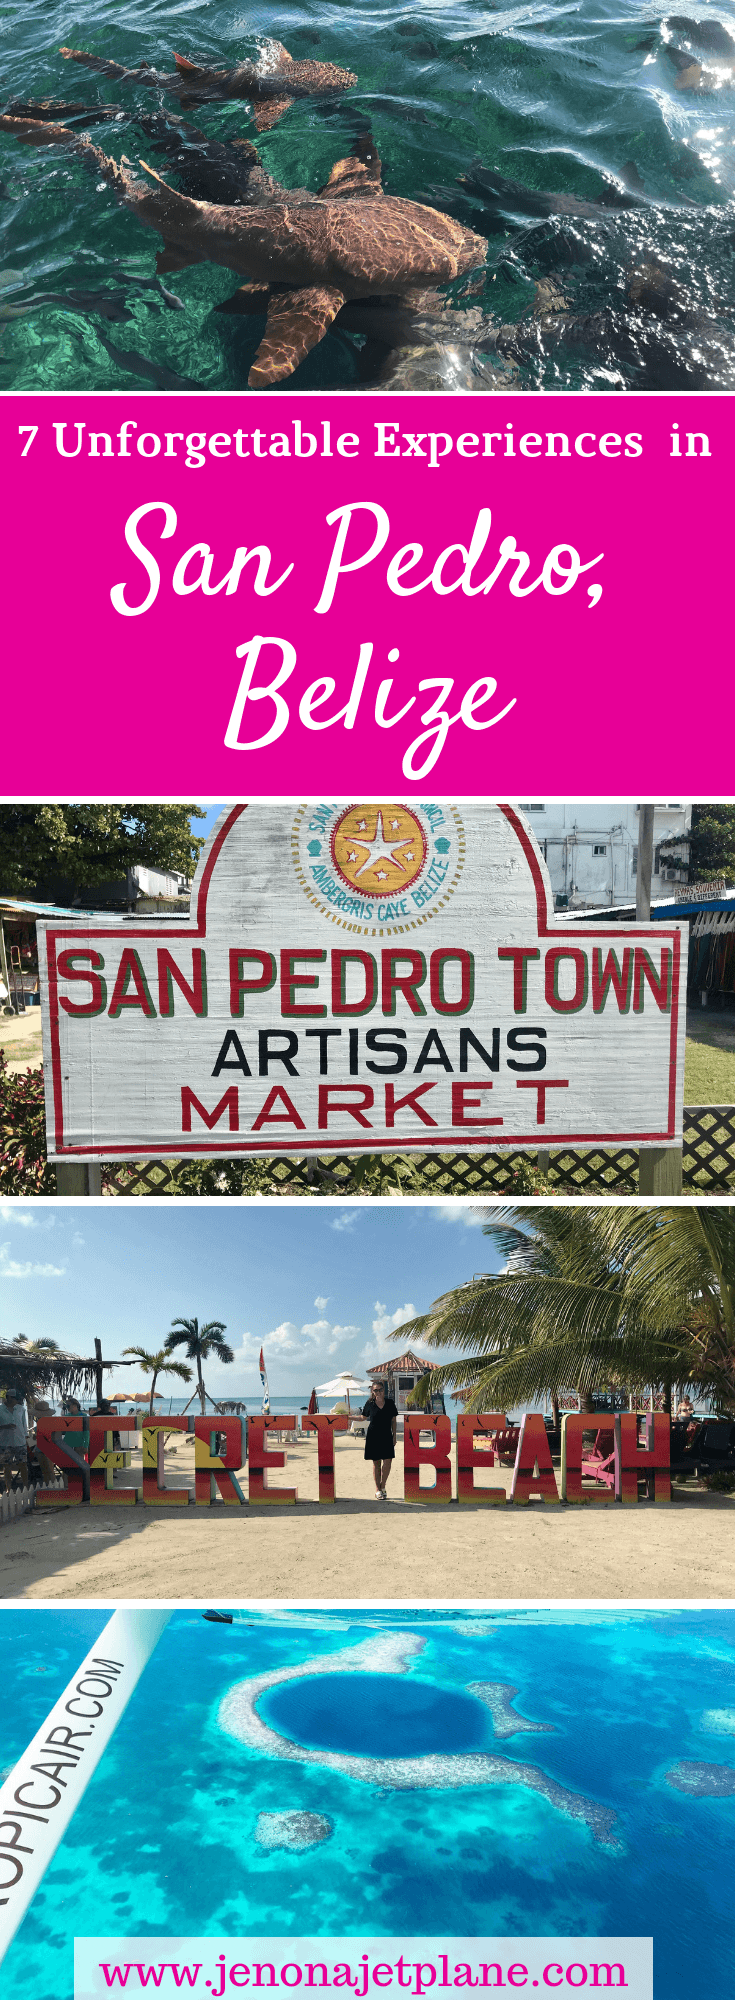 Looking for the best things to do in San Pedro, Belize? From swimming with sharks to visiting the Secret Beach, here's everything you need to do in Ambergris Caye's capital city. #ambergriscaye #sanpedrobelize #belizetravel #whattodoinsanpedrobelize #bucketlist #wanderlusttravel